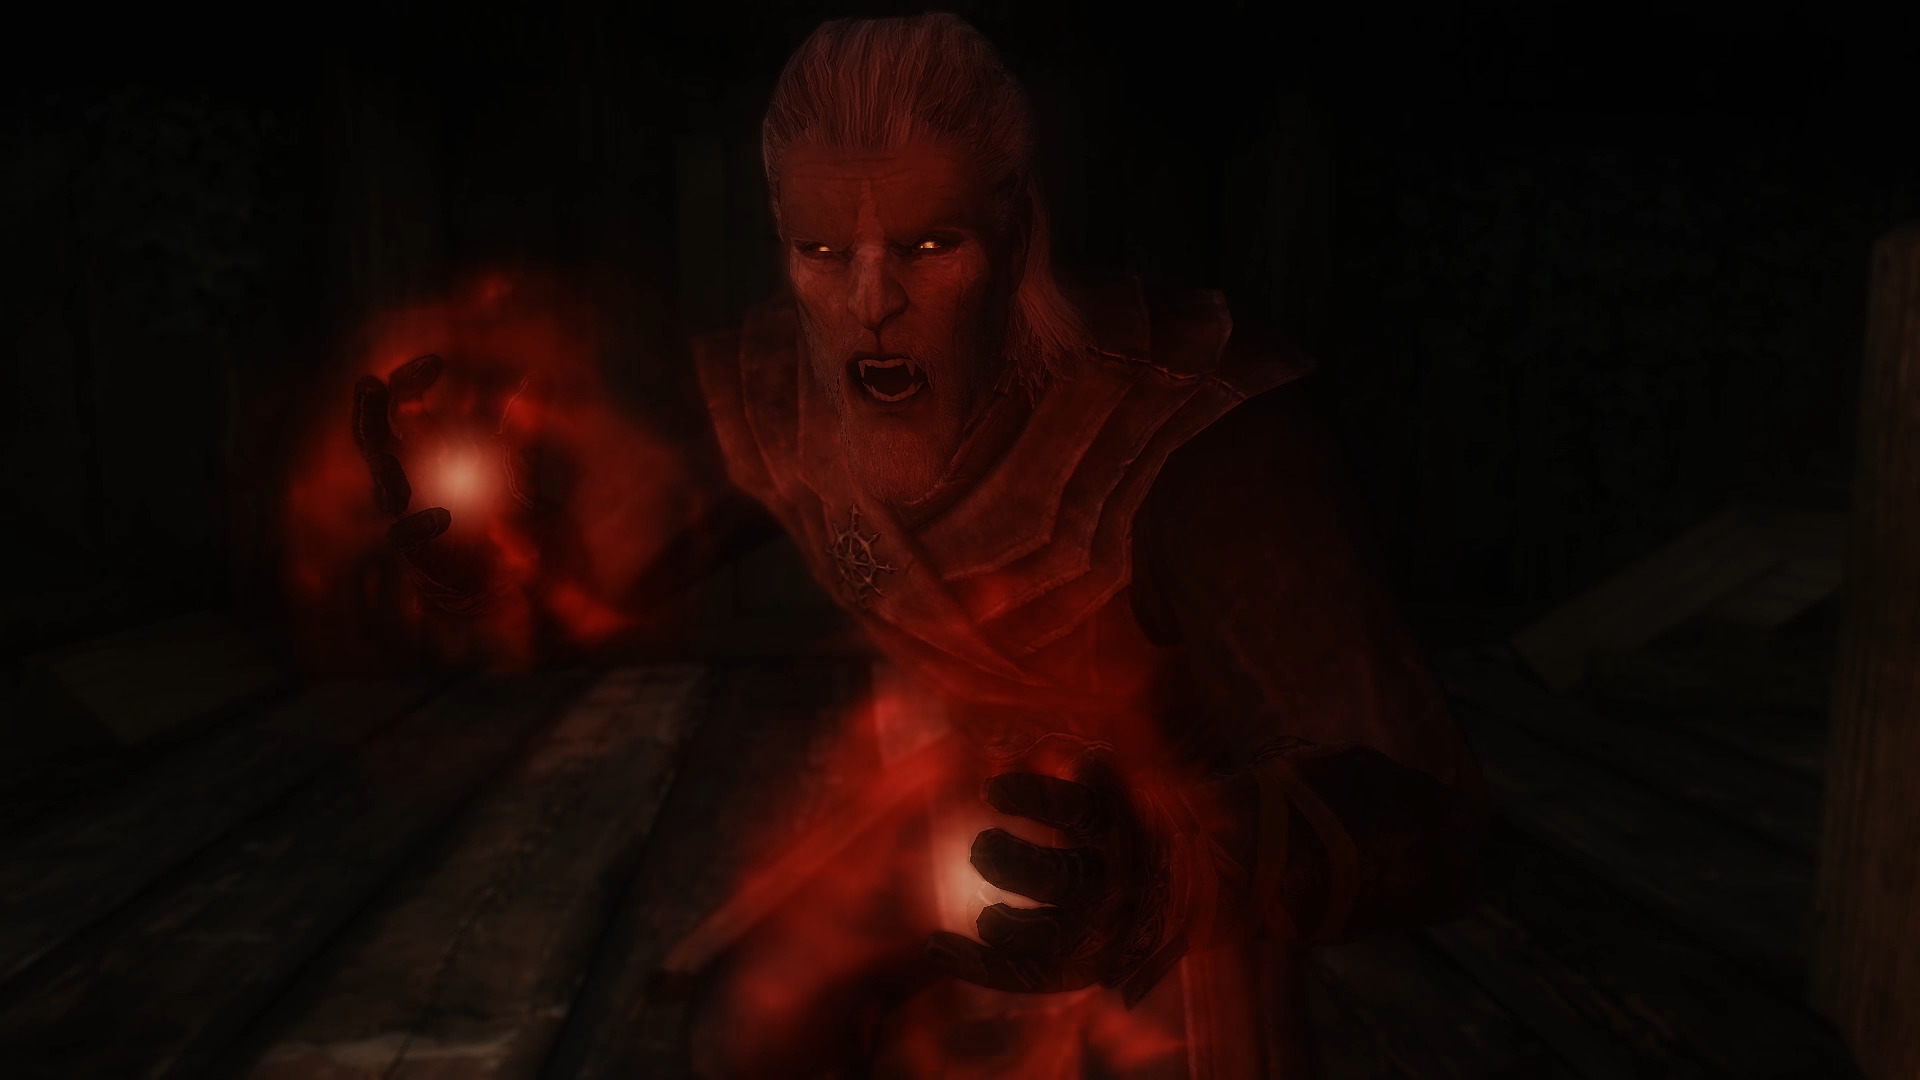 Skyrim Build Ideas: The Vampire – Perks, Gameplay, and Roleplay Ideas For New Playstyle